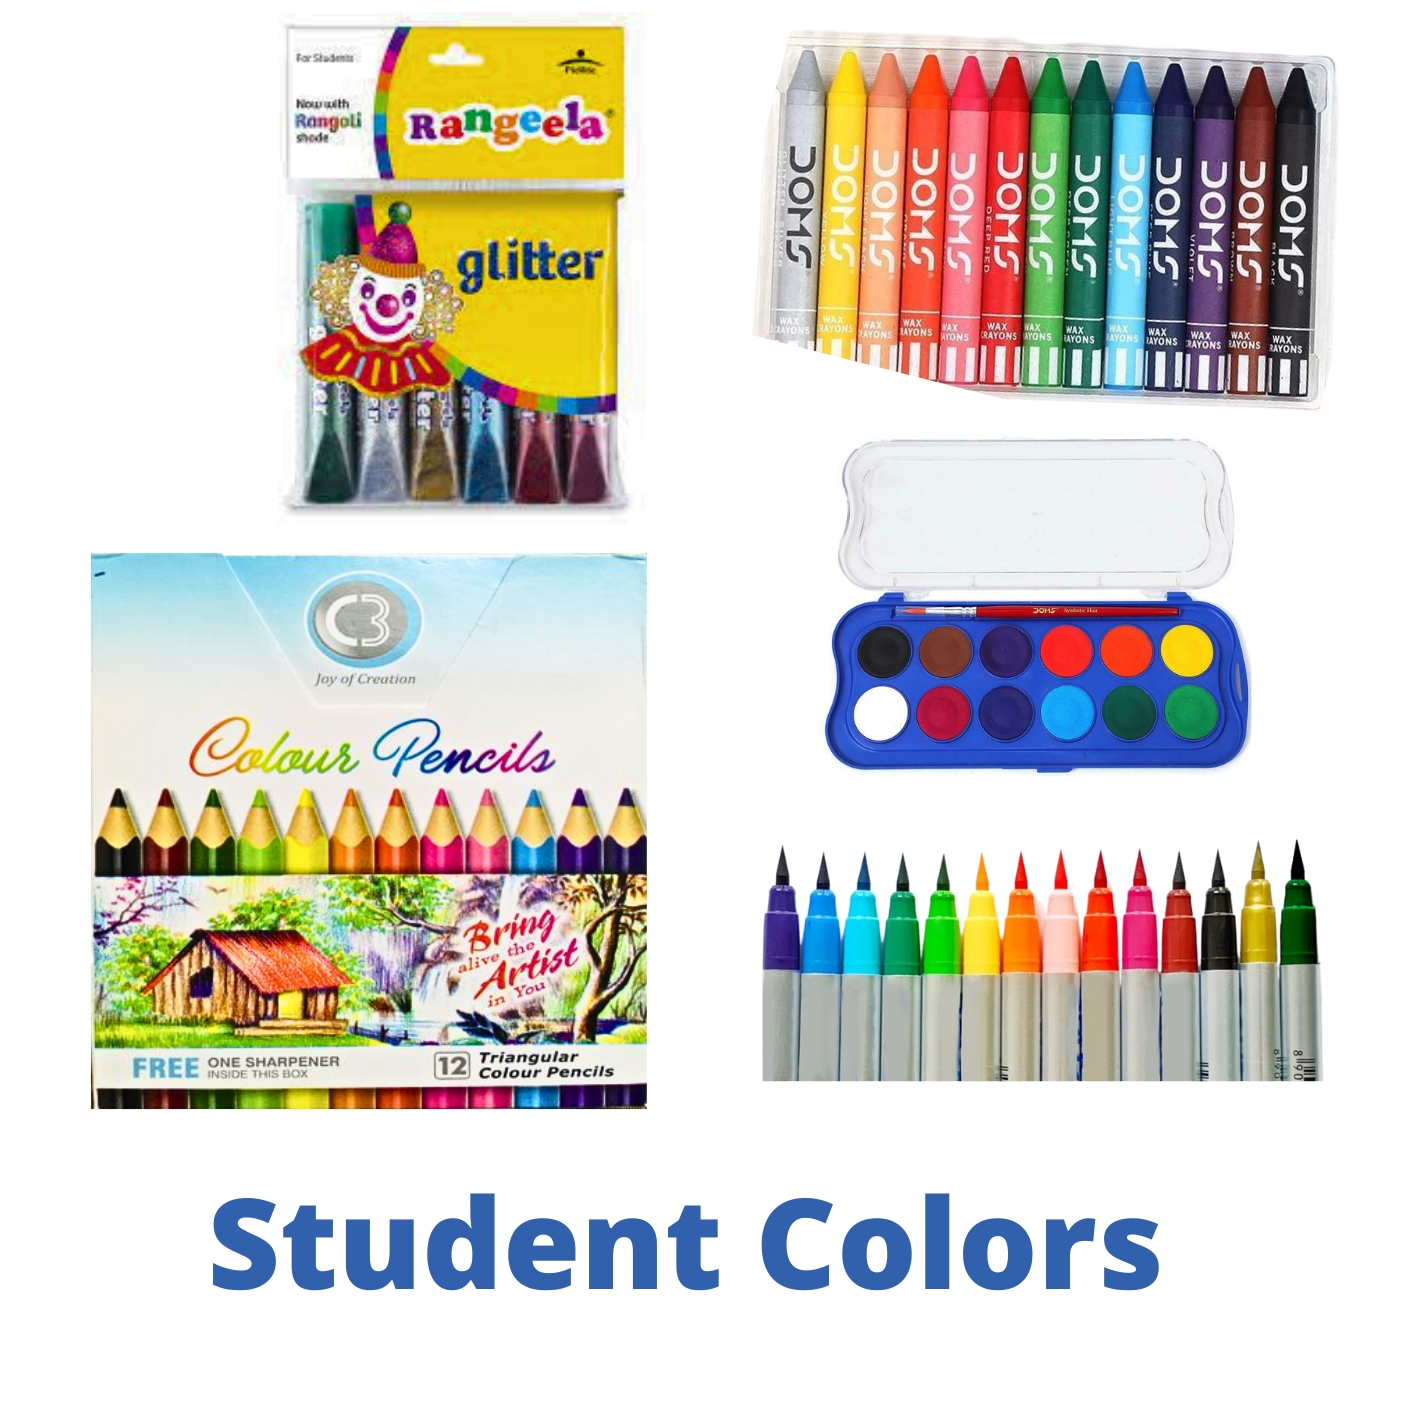 Student Colors